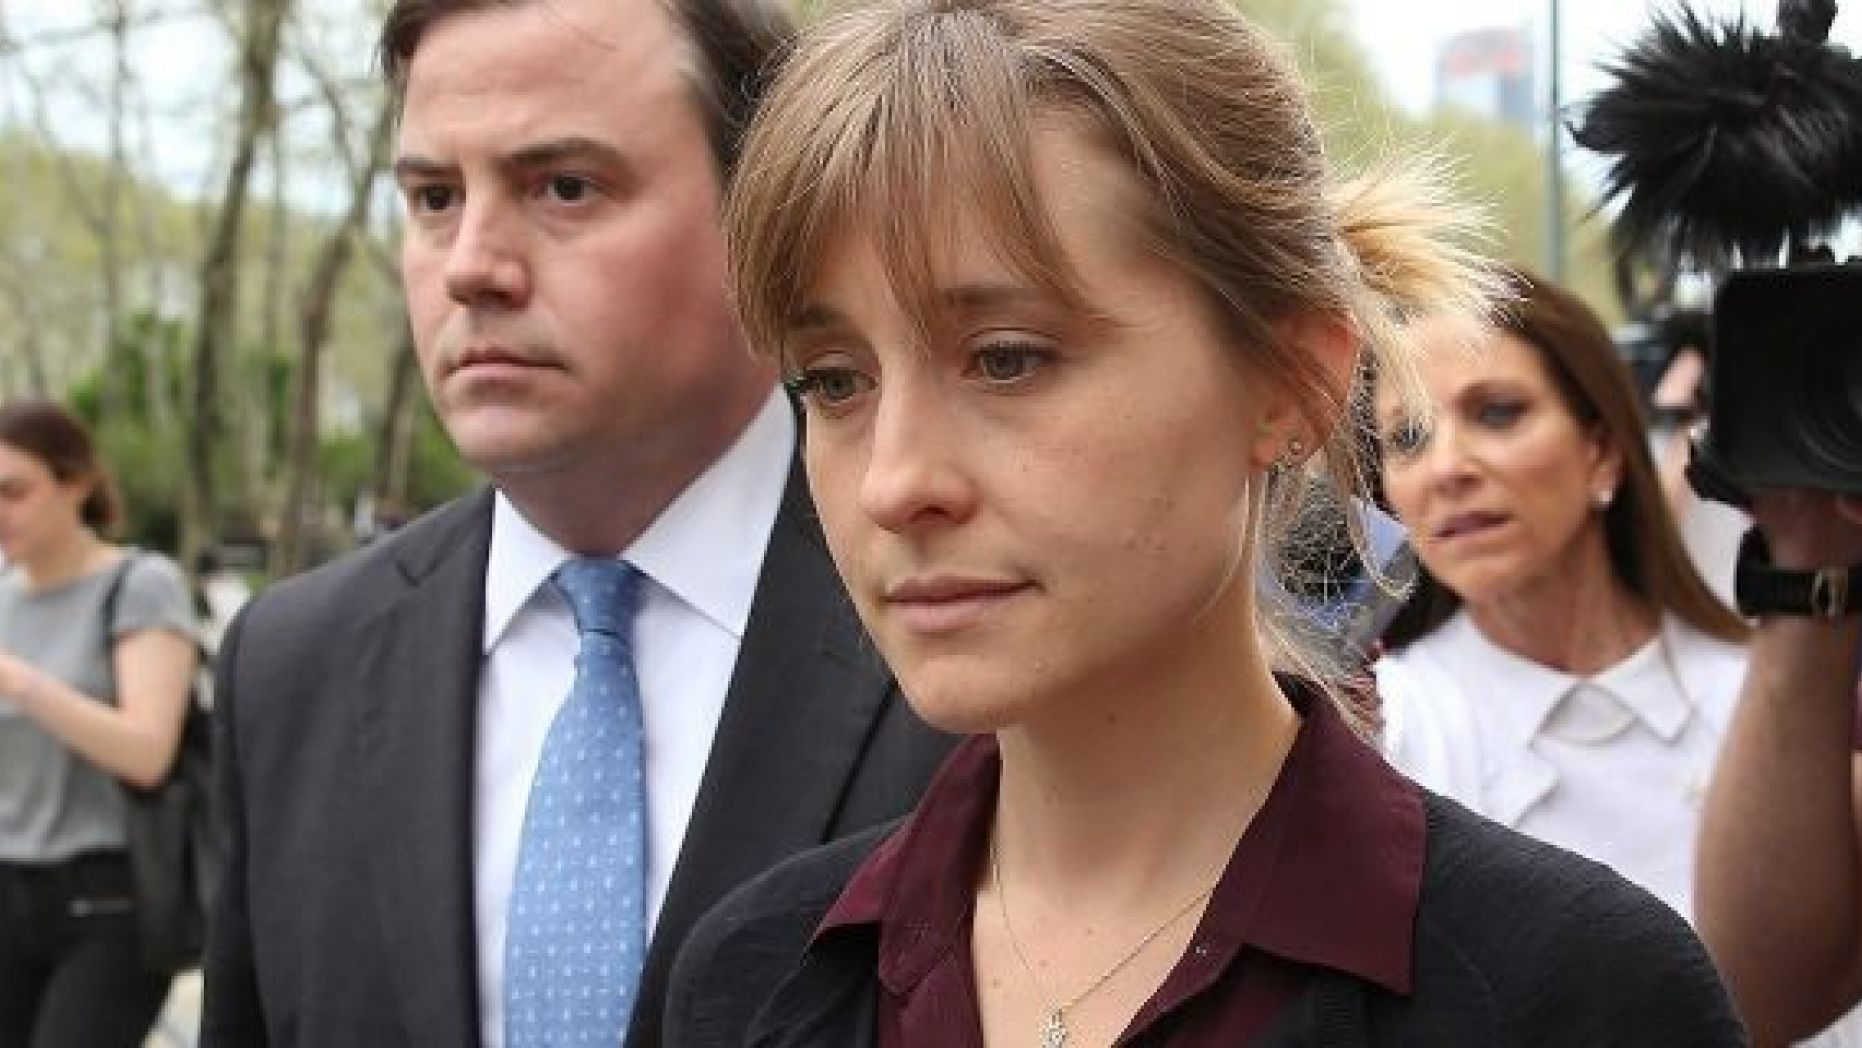 Allison Mack in court on sex trafficking charges in May 2018